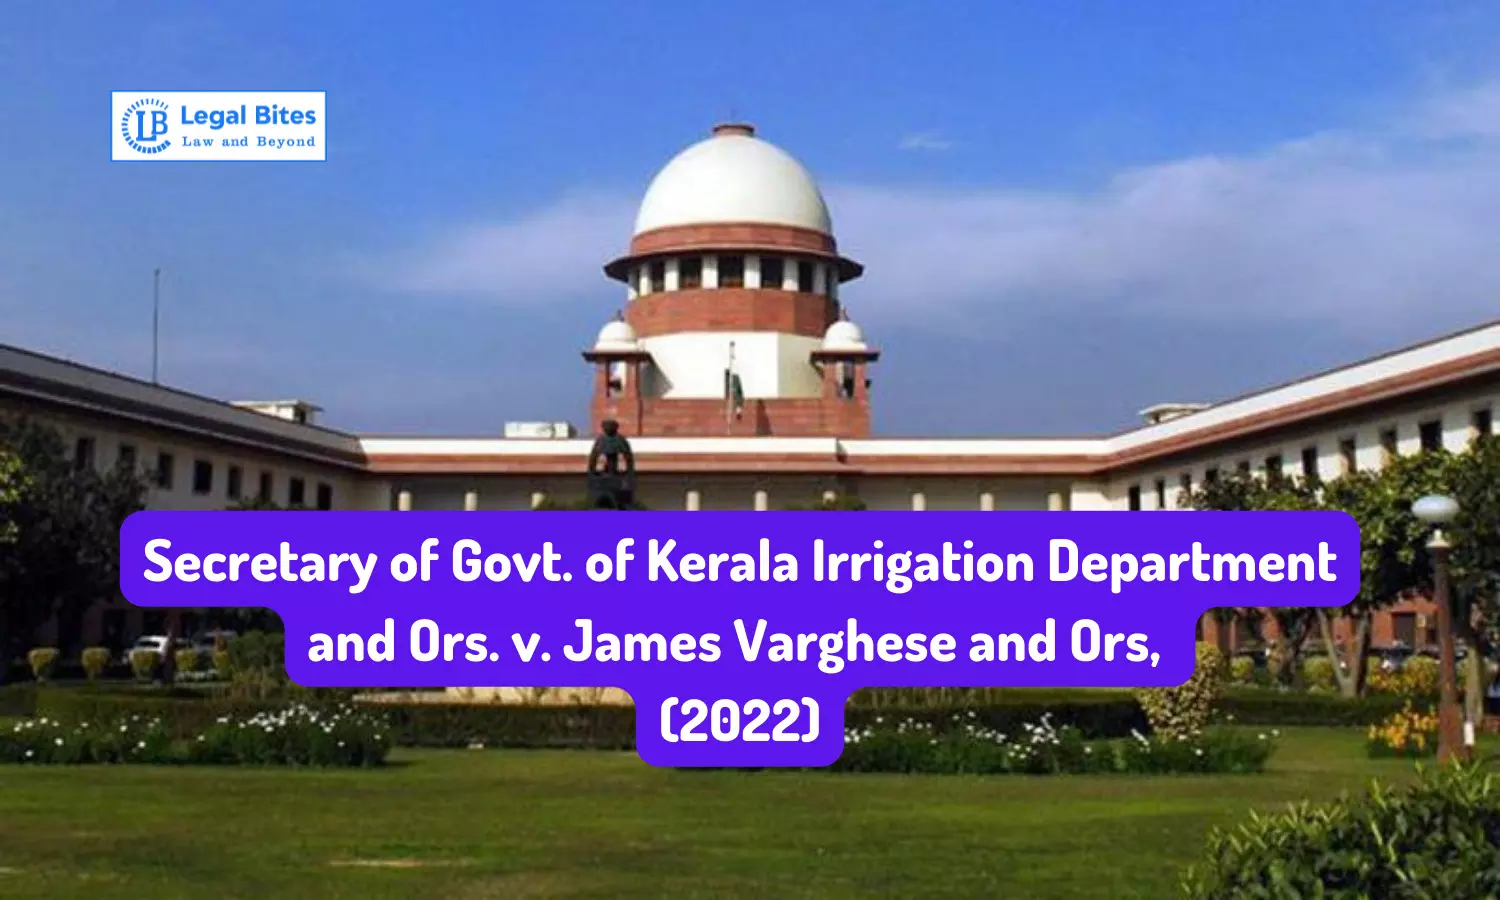 Case Summary: Secretary of Govt. of Kerala Irrigation Department and Ors. v. James Varghese and Ors, (2022) | Constitutional validity of the Kerala Revocation of Arbitration Clauses and Reopening of Awards Act, 1998